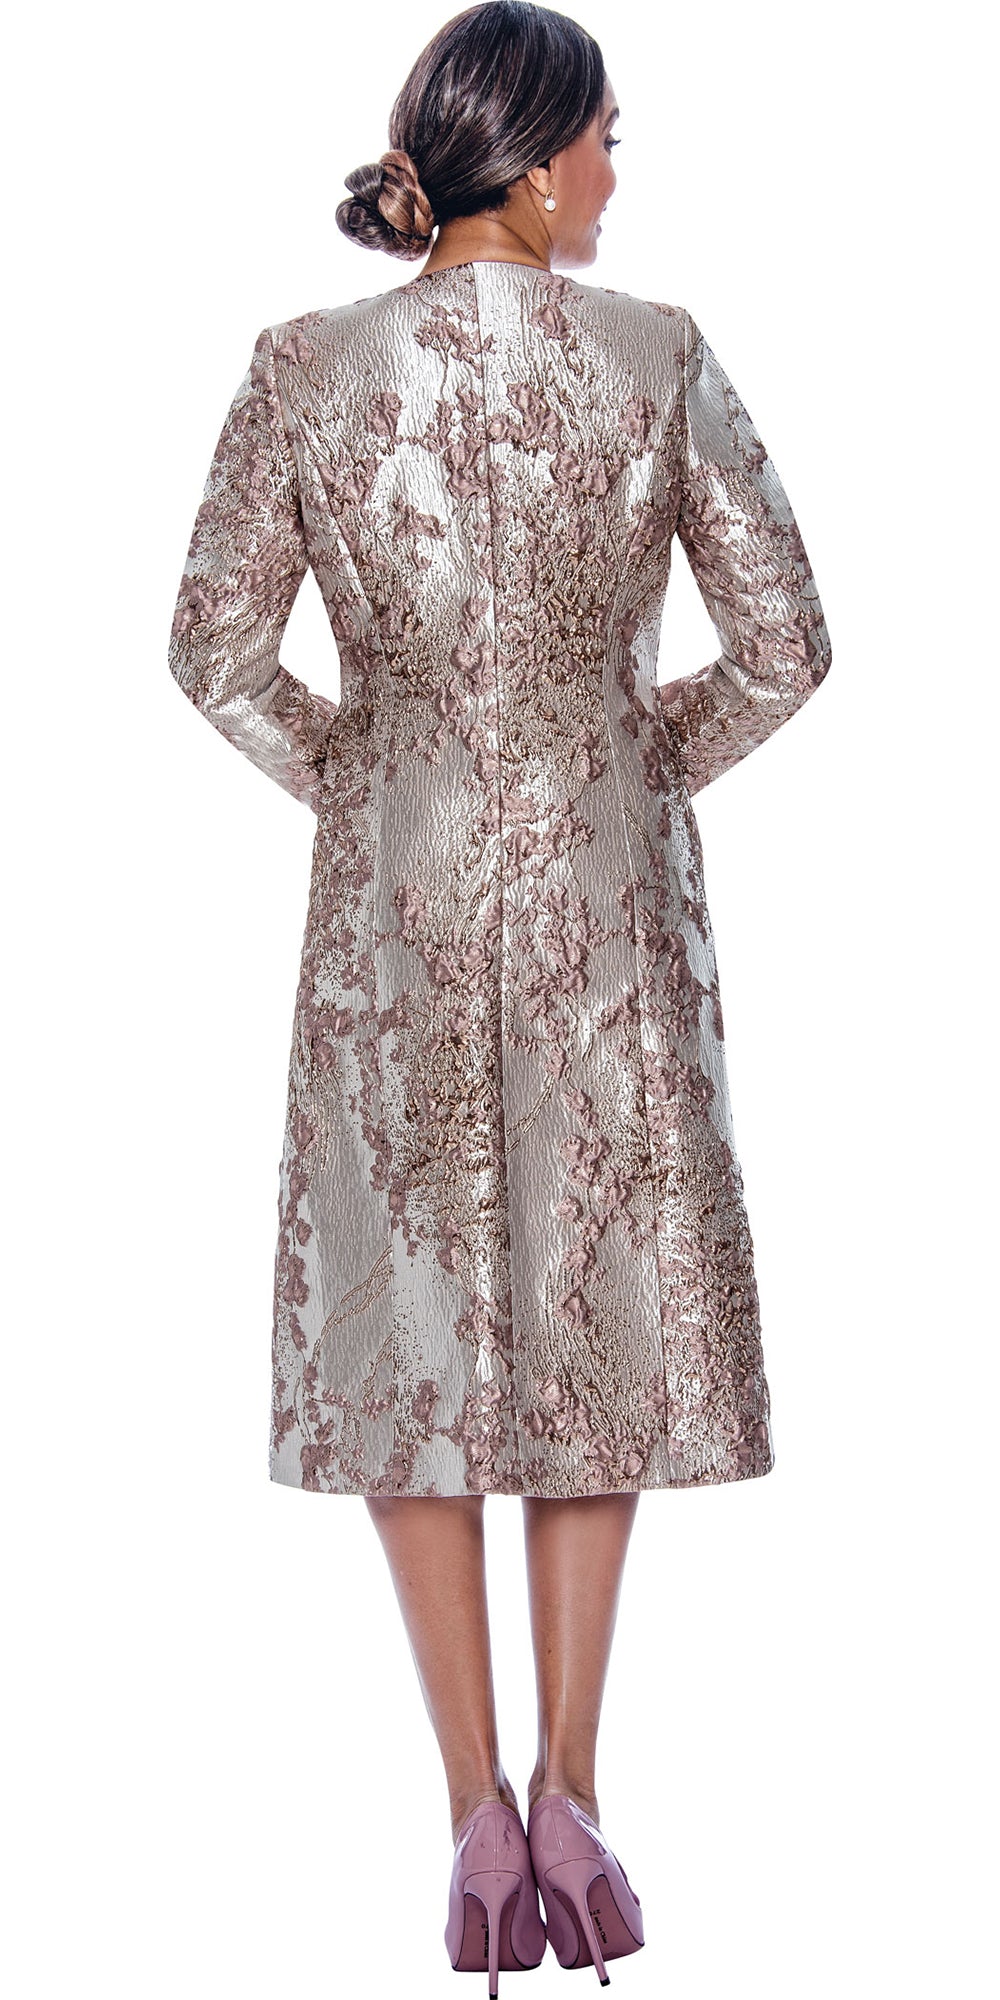 Divine Queen 2322 - Lilac - 2 Piece Jacquard Jacket and Silky Twill Dress